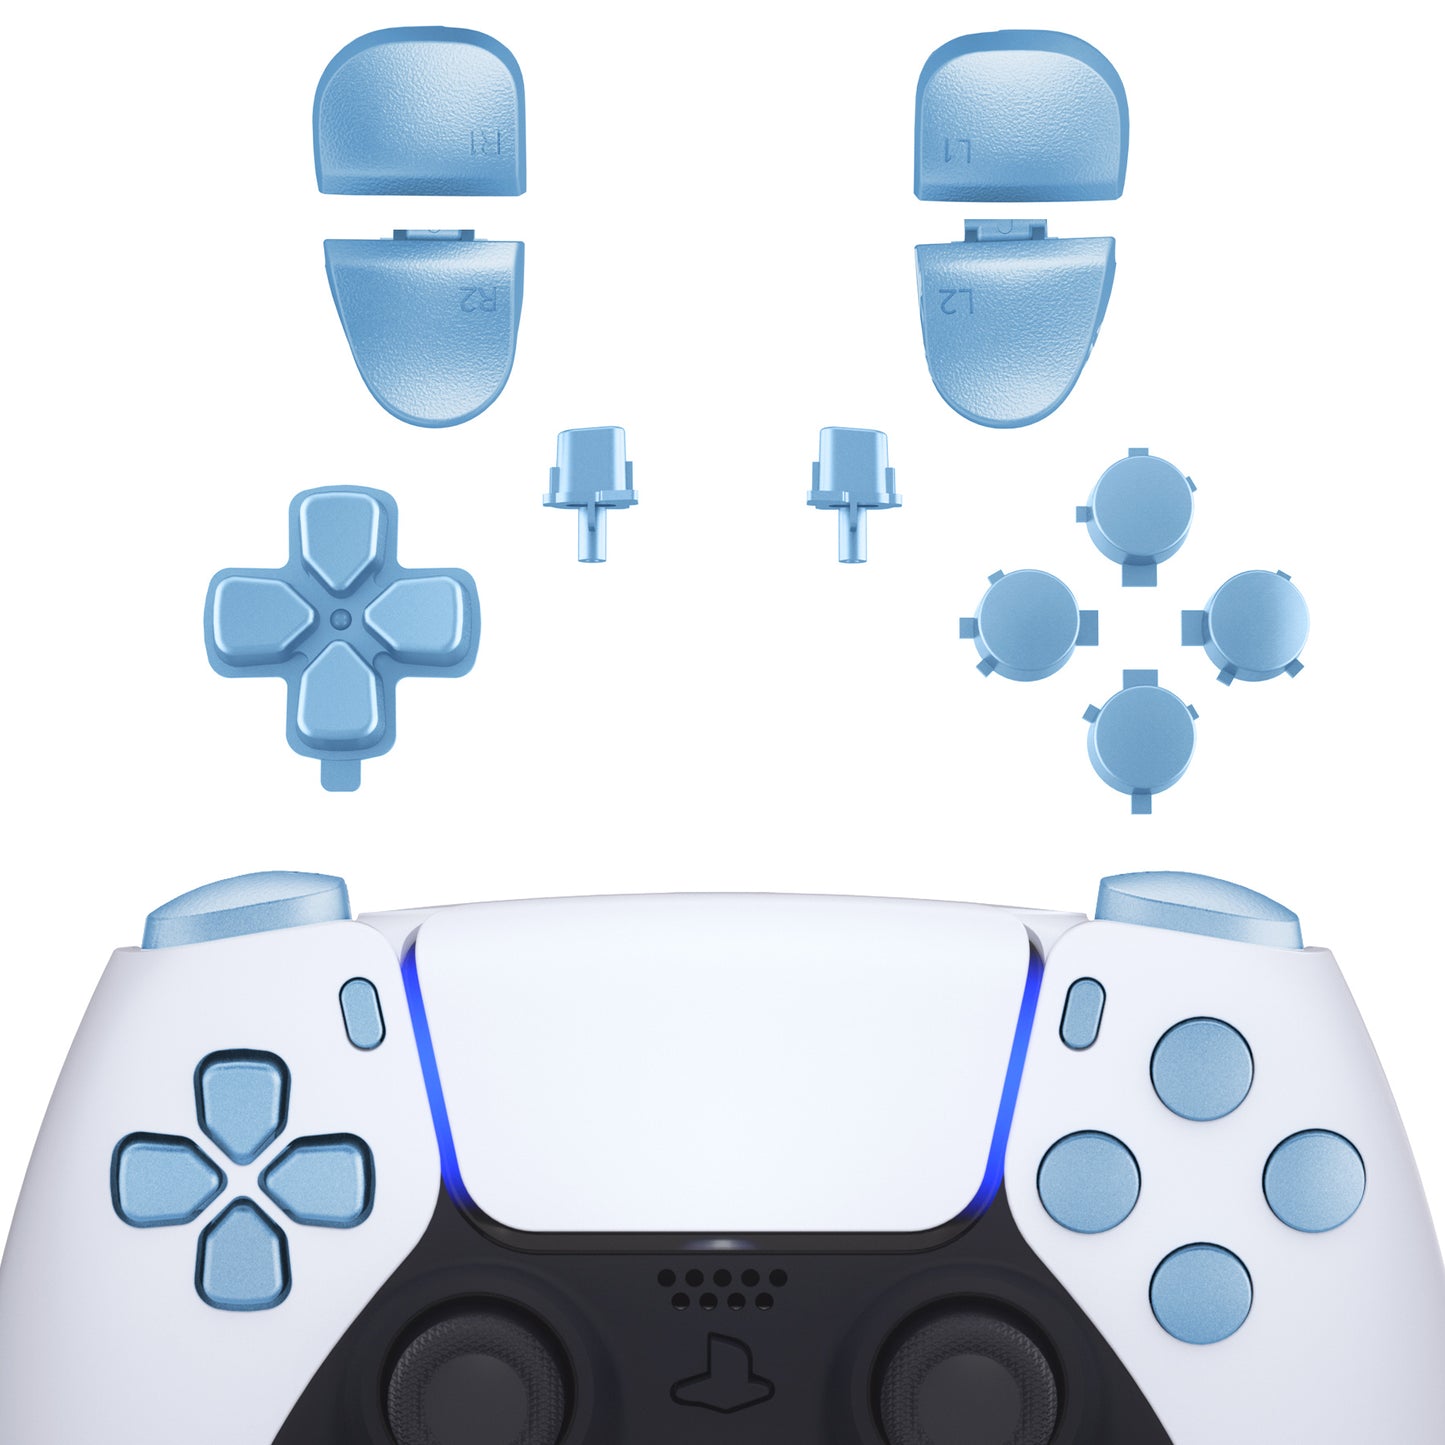 eXtremeRate Retail Replacement D-pad R1 L1 R2 L2 Triggers Share Options Face Buttons, Metallic Titanium Blue Full Set Buttons Compatible with ps5 Controller BDM-030 - JPF1038G3